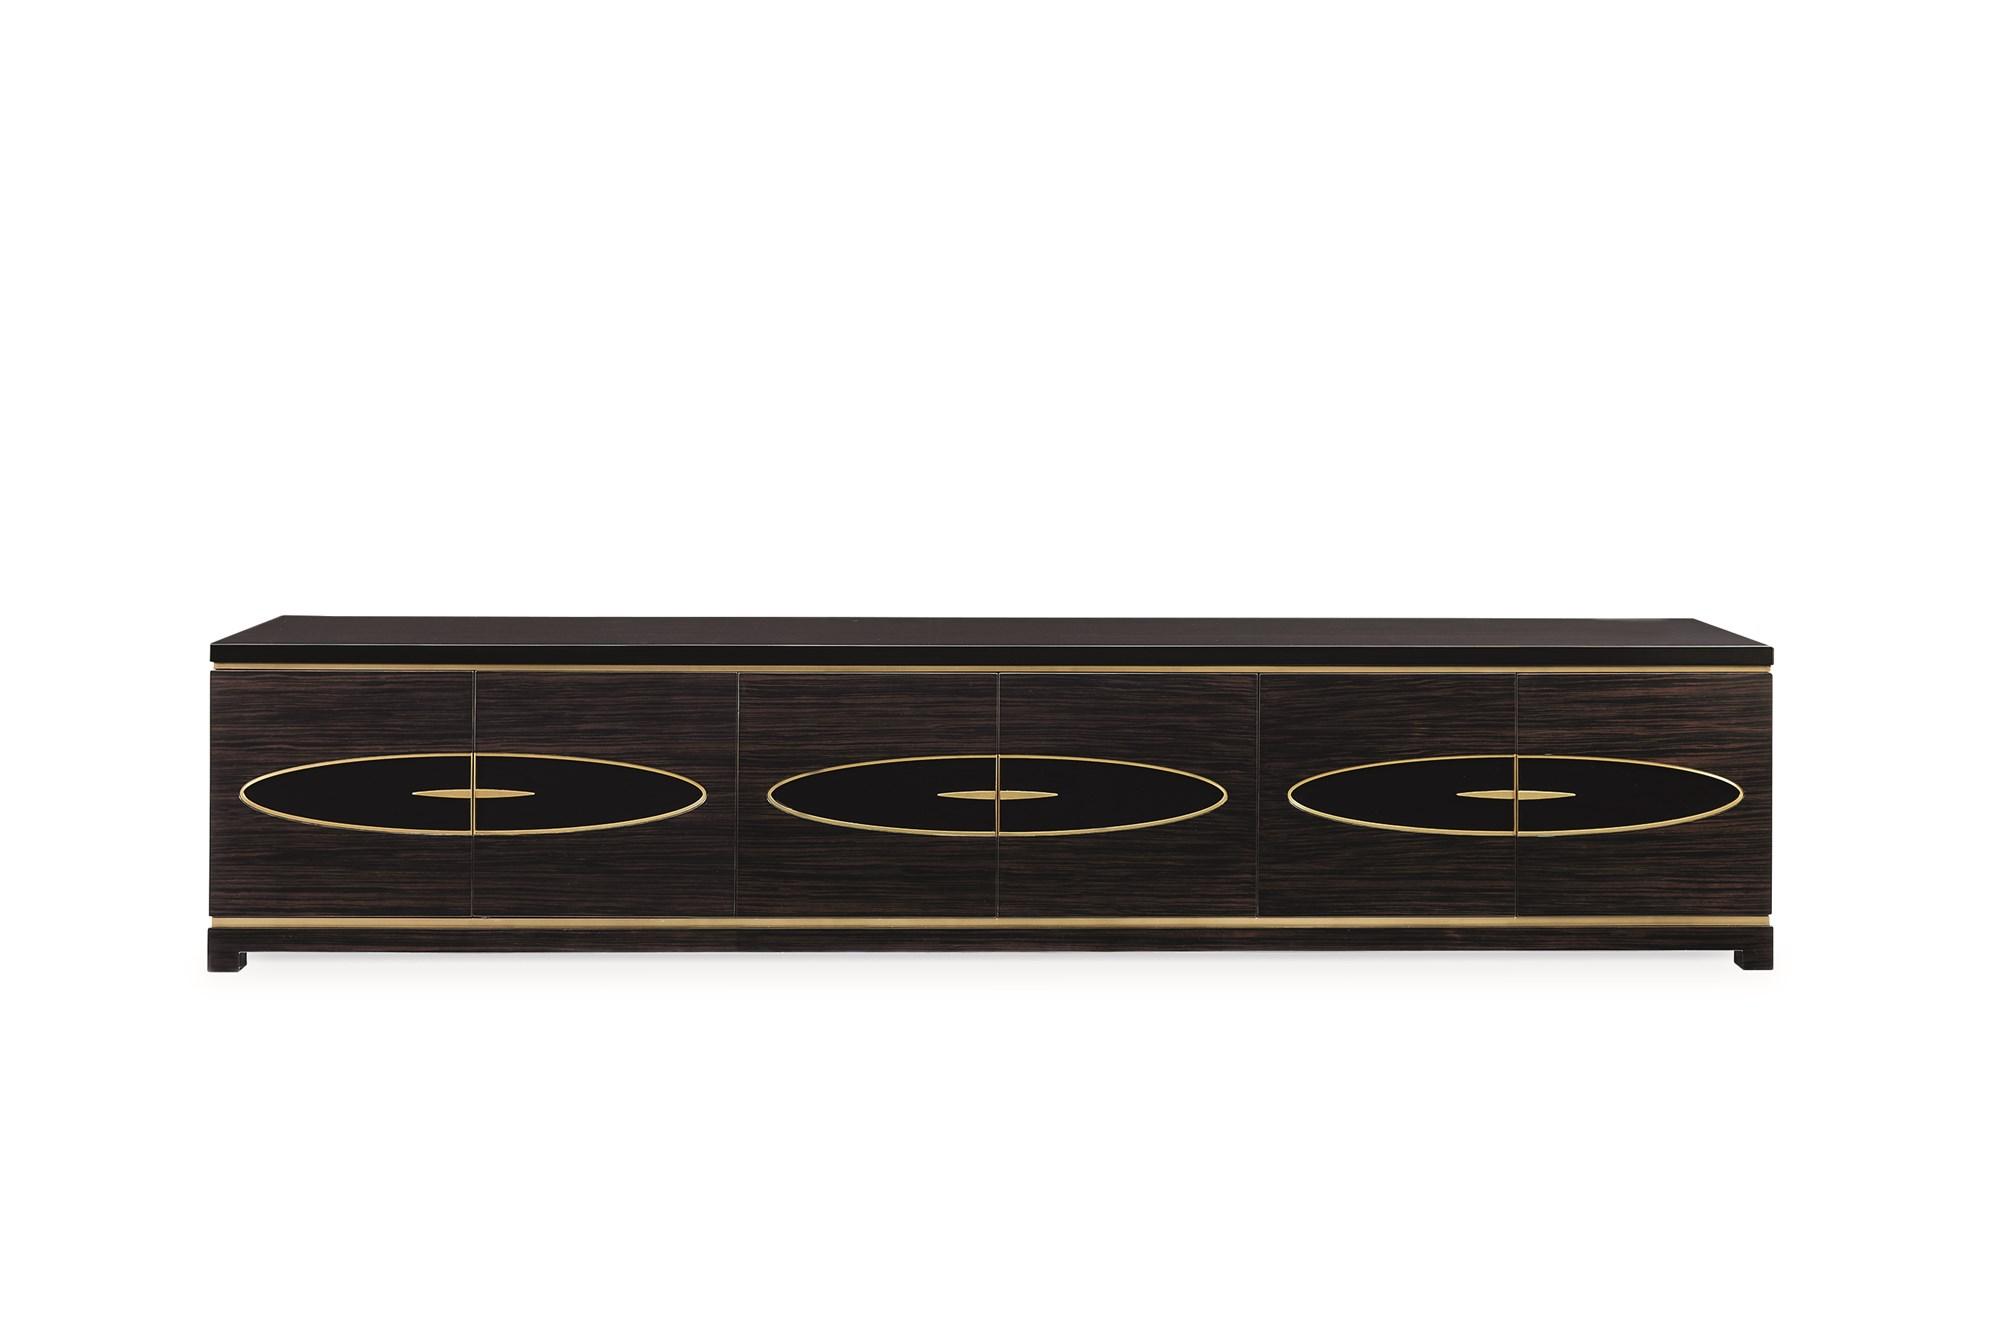 

    
Ebony & Urban Brass THE METROPOLIS ENTERTAINMENT CONSOLE by Caracole
